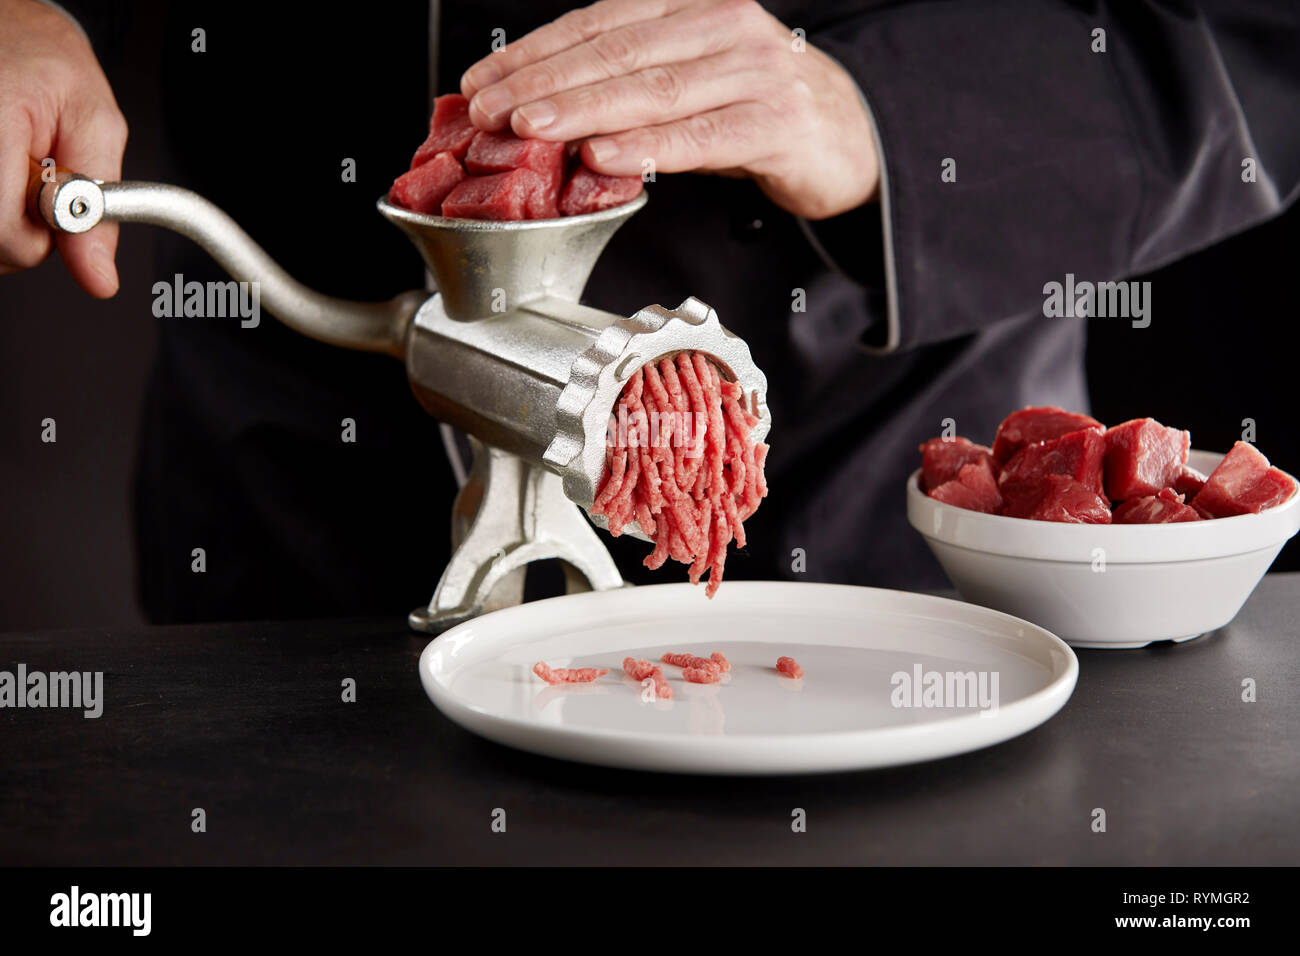 https://c8.alamy.com/comp/RYMGR2/cook-in-black-uniform-mincing-fresh-beef-or-pork-using-old-metal-manual-meat-grinder-on-kitchen-counter-pieces-of-fresh-red-meat-in-white-bowl-cooki-RYMGR2.jpg